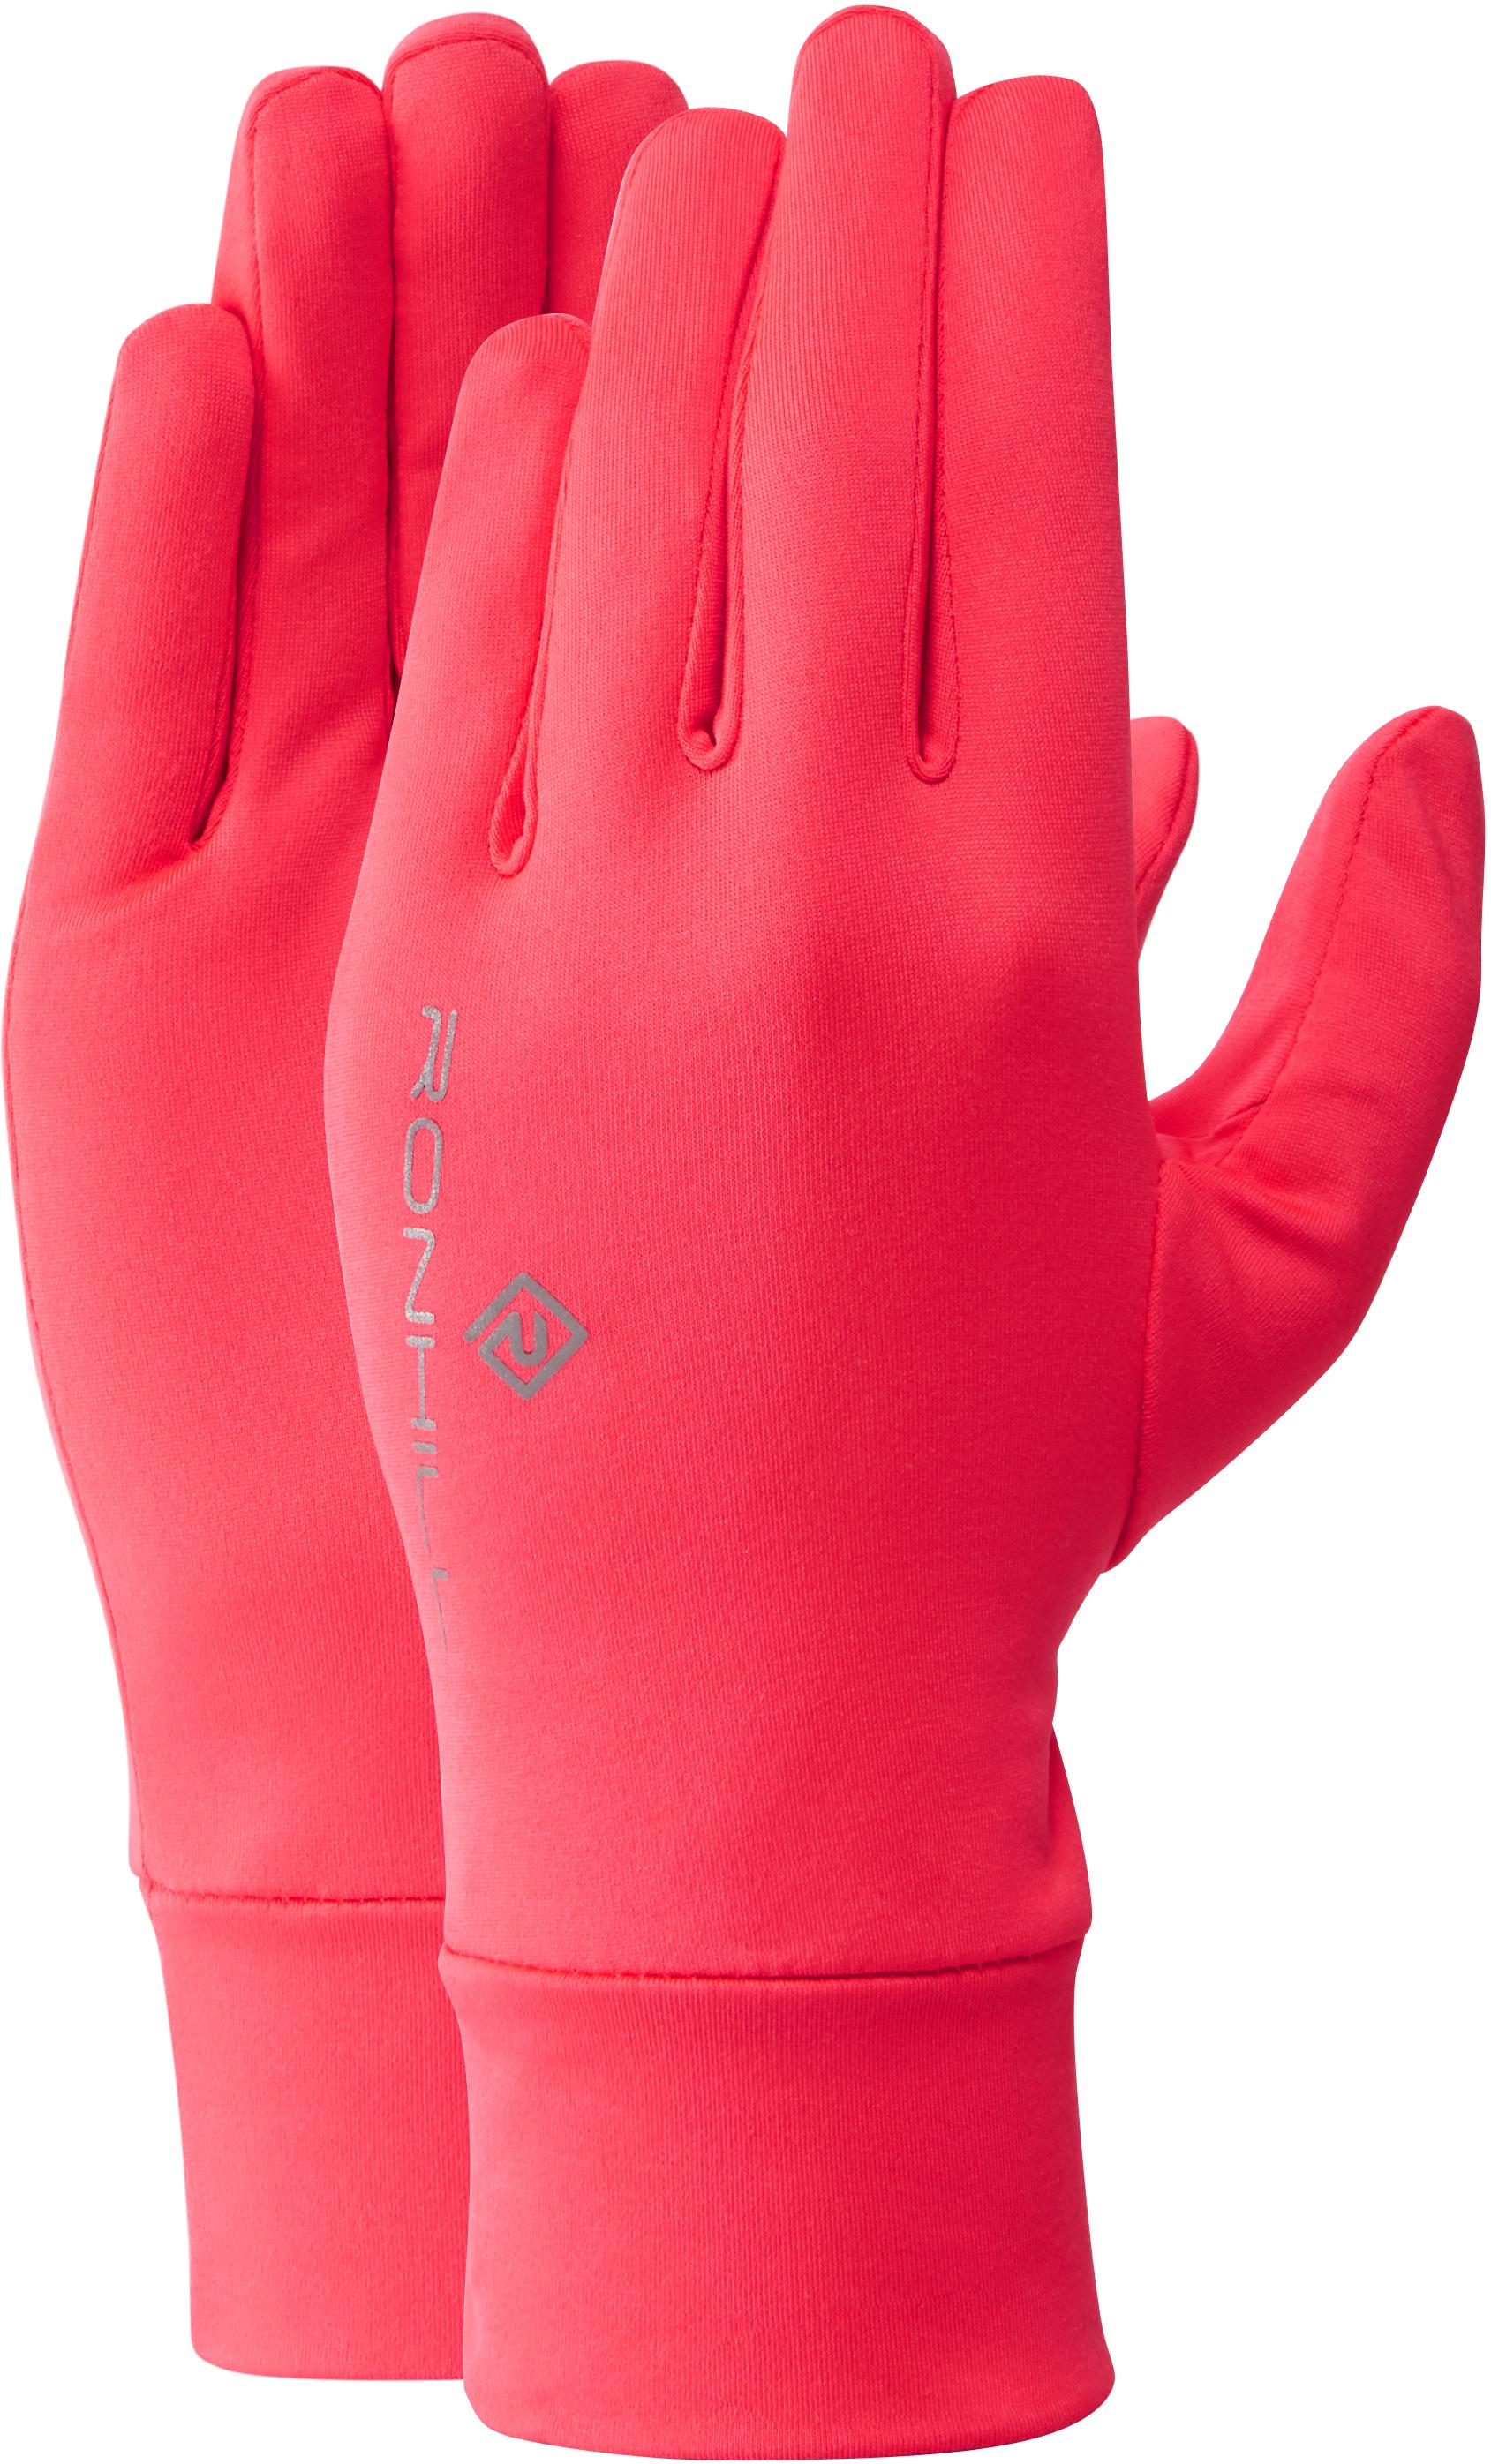 Image of Gants Ronhill Classic - Hot Pink